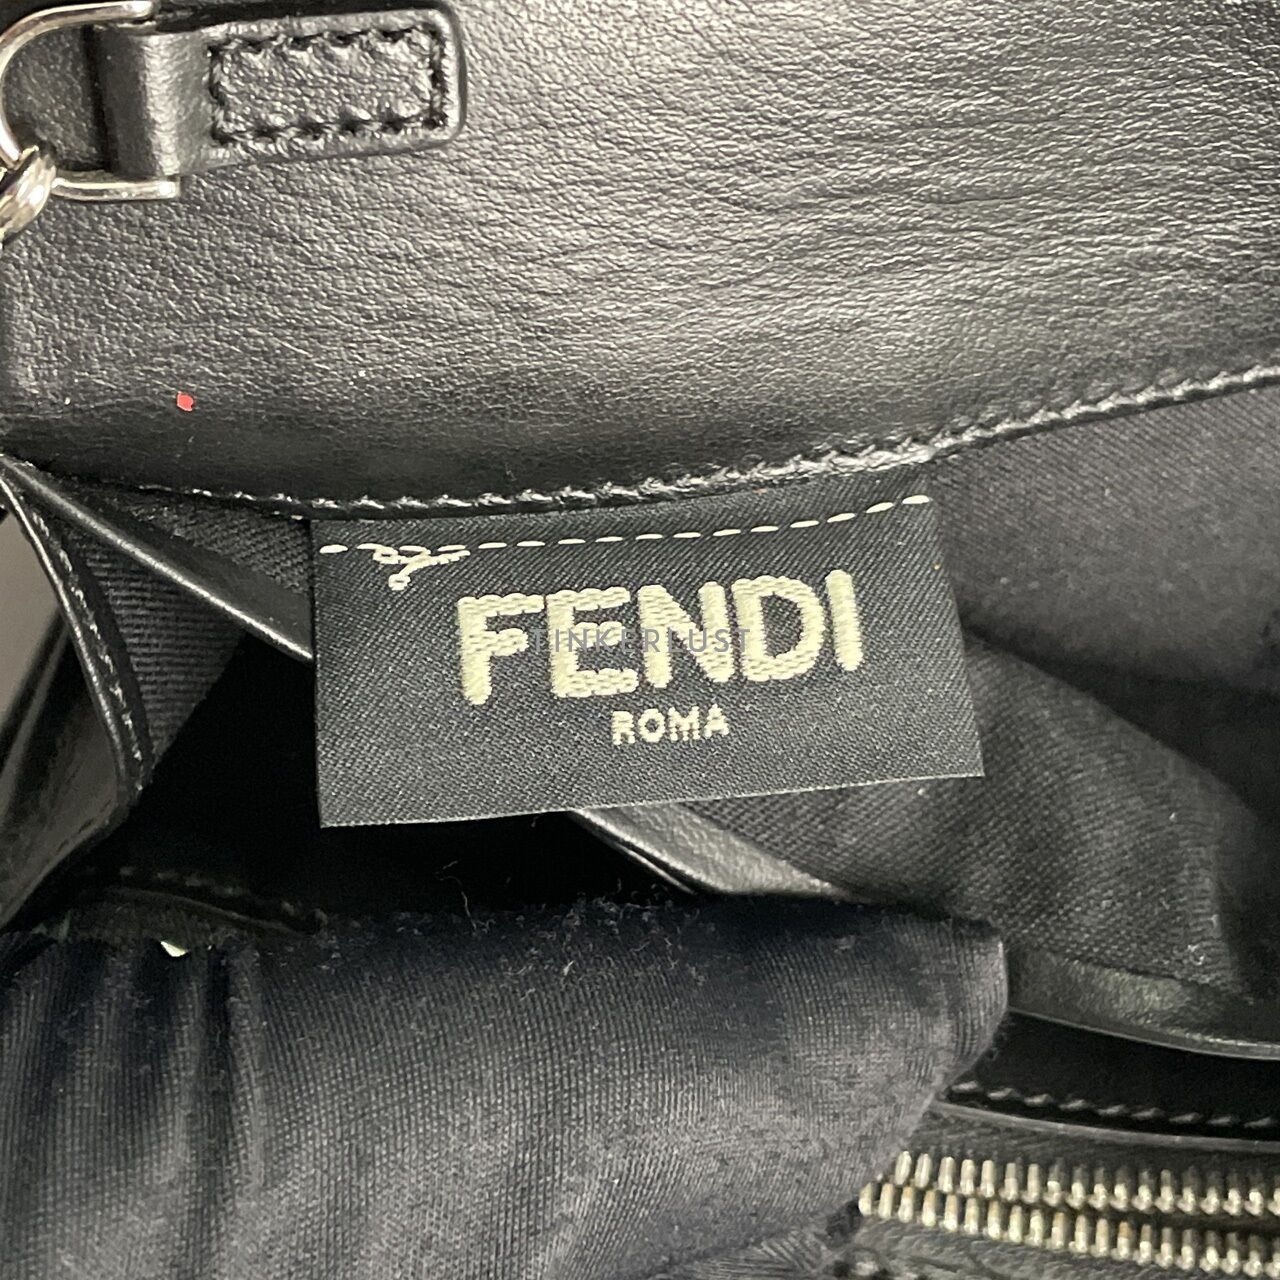 Fendi Studs Continental Black Leather SHW Wallet On Chain